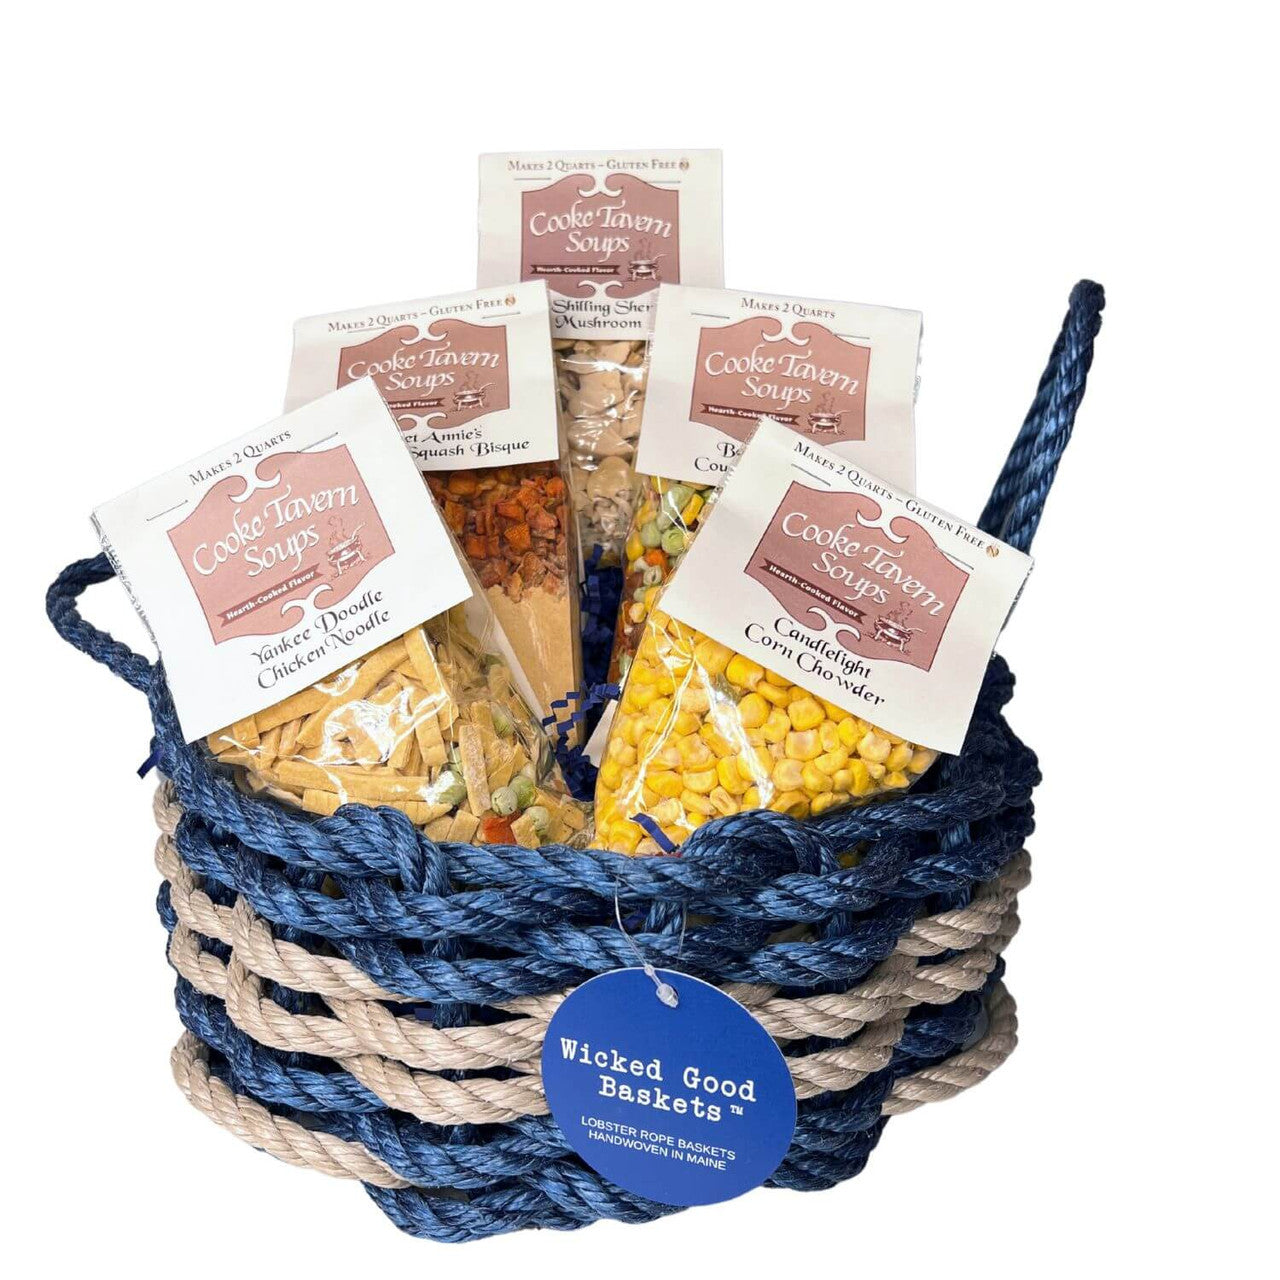 New England Chowder Lobster Rope Gift Basket Food Gift Baskets The New England Trading Company   